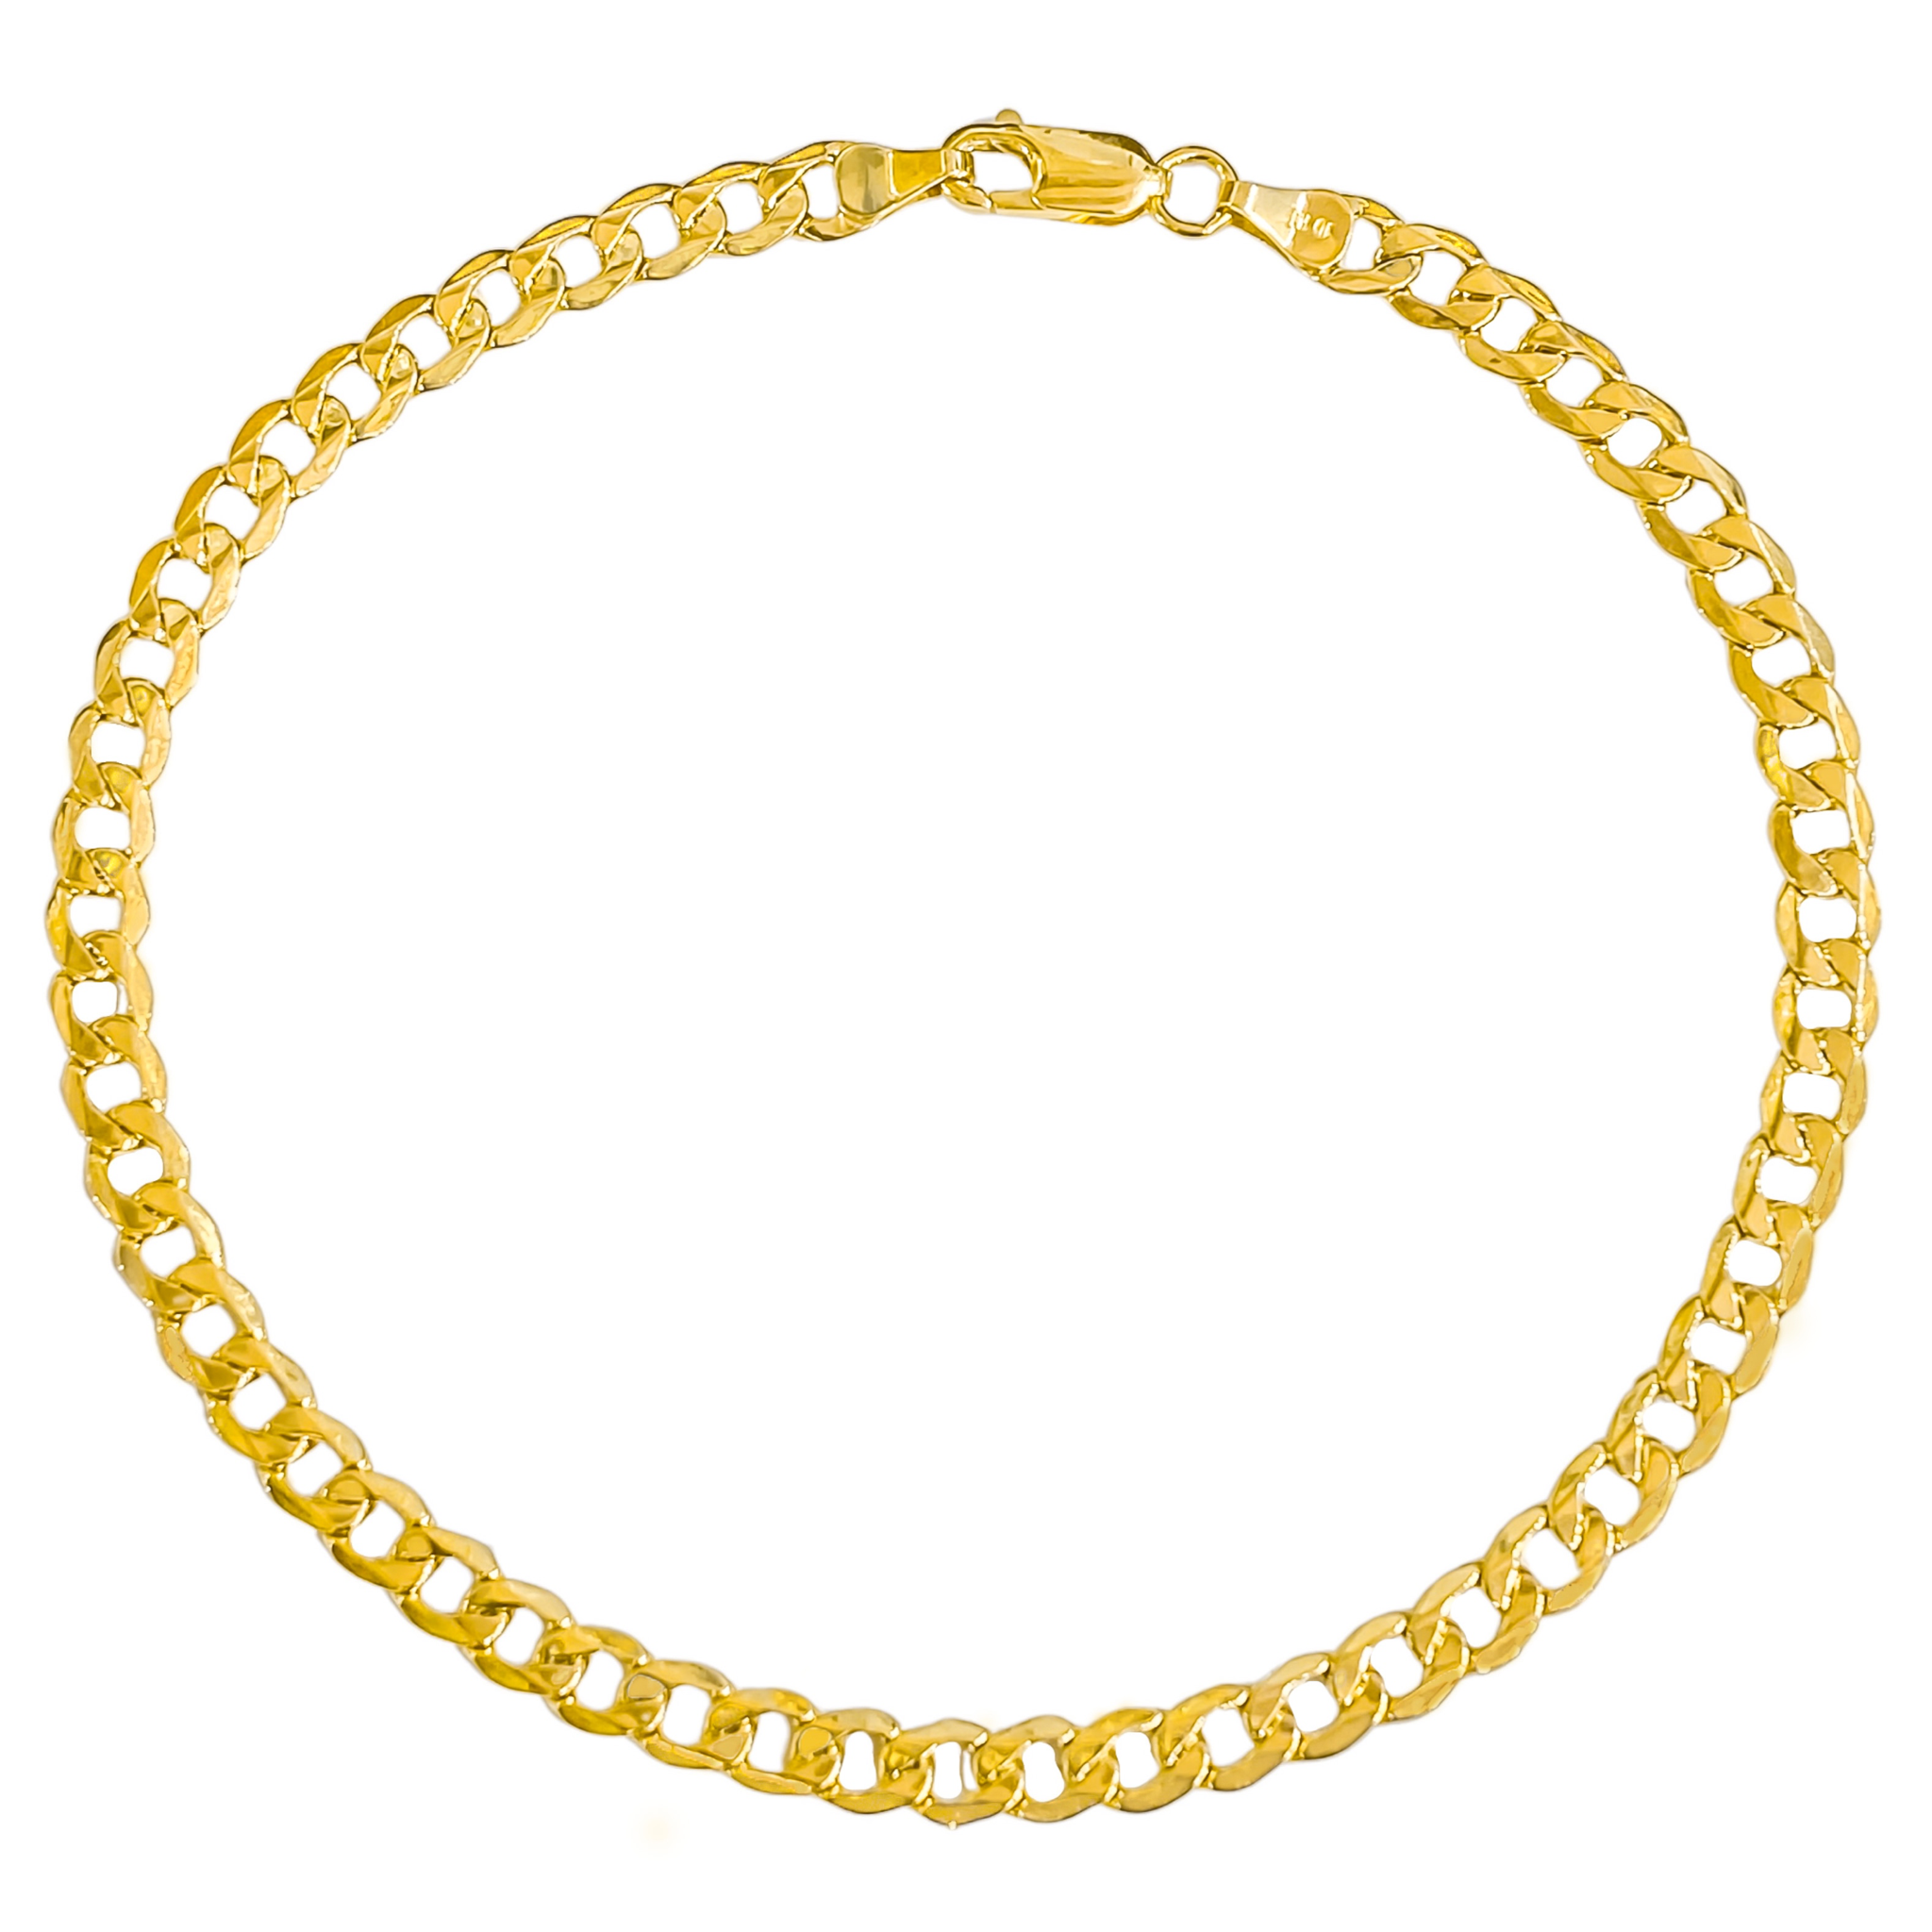 10K YELLOW GOLD CUBAN CHAIN ANKLET -5MM